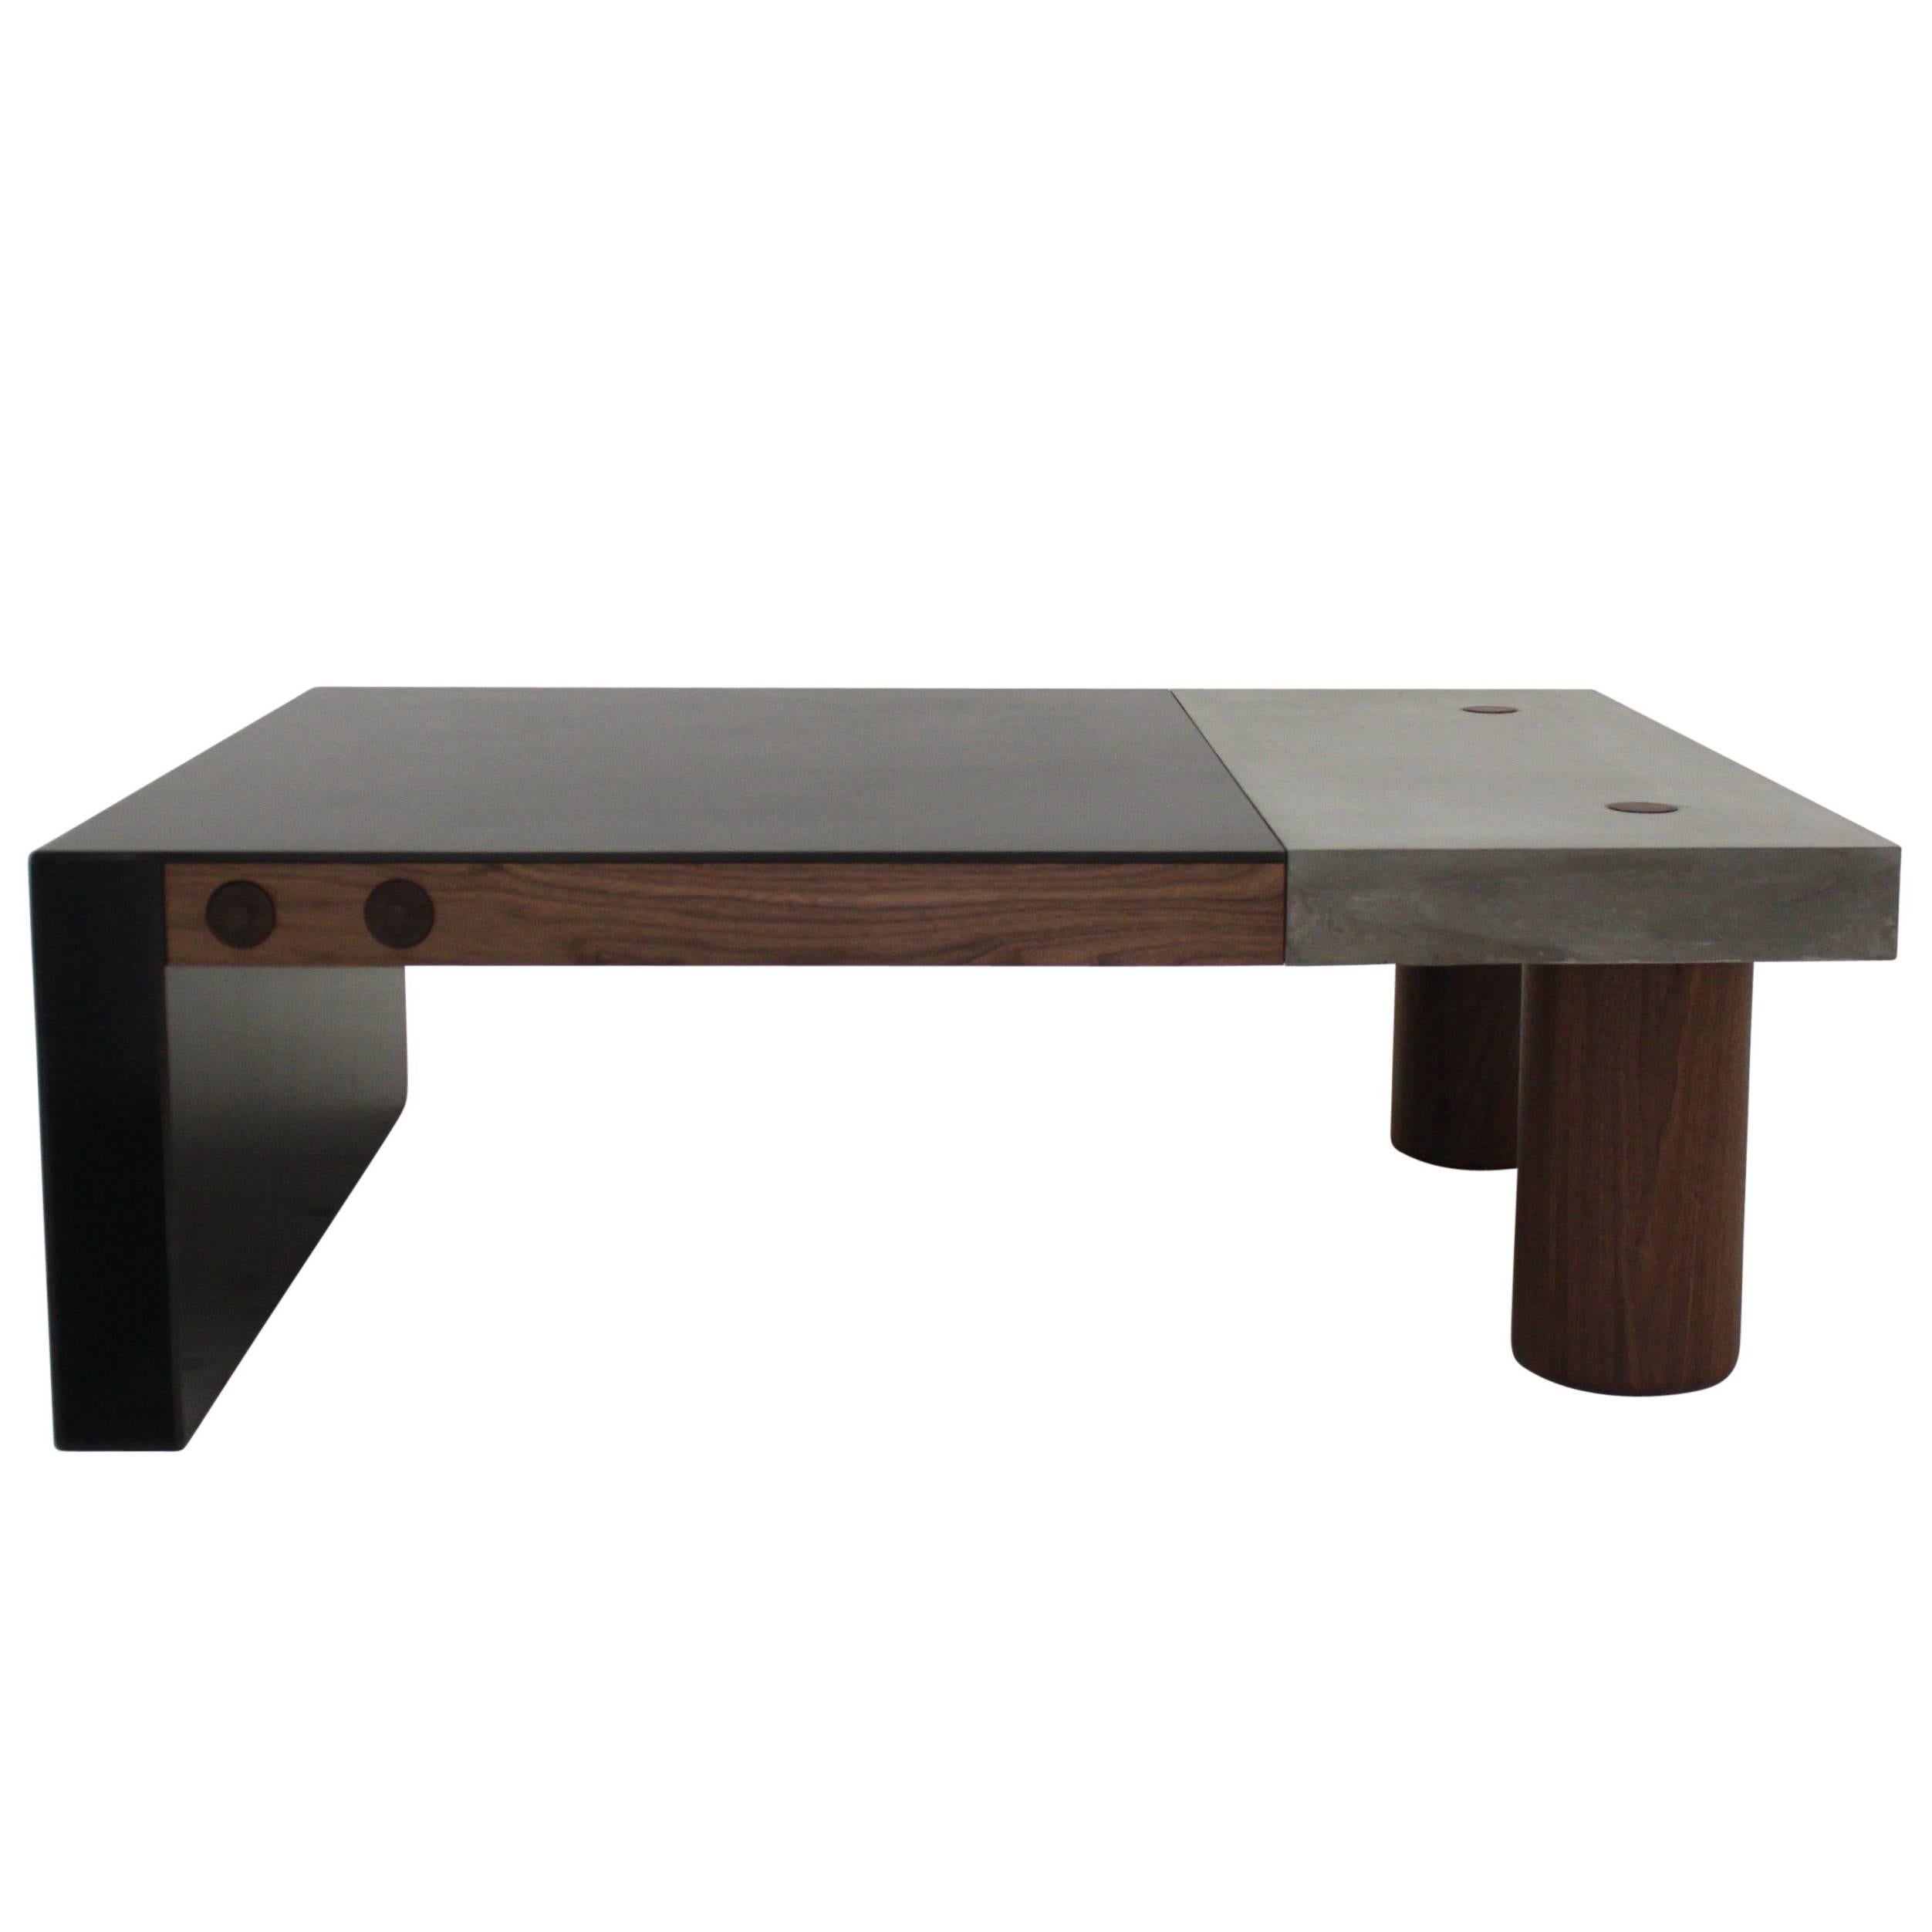 Cast Concrete, Hand-Blackened Steel and Walnut "Paradigm Coffee Table" For Sale